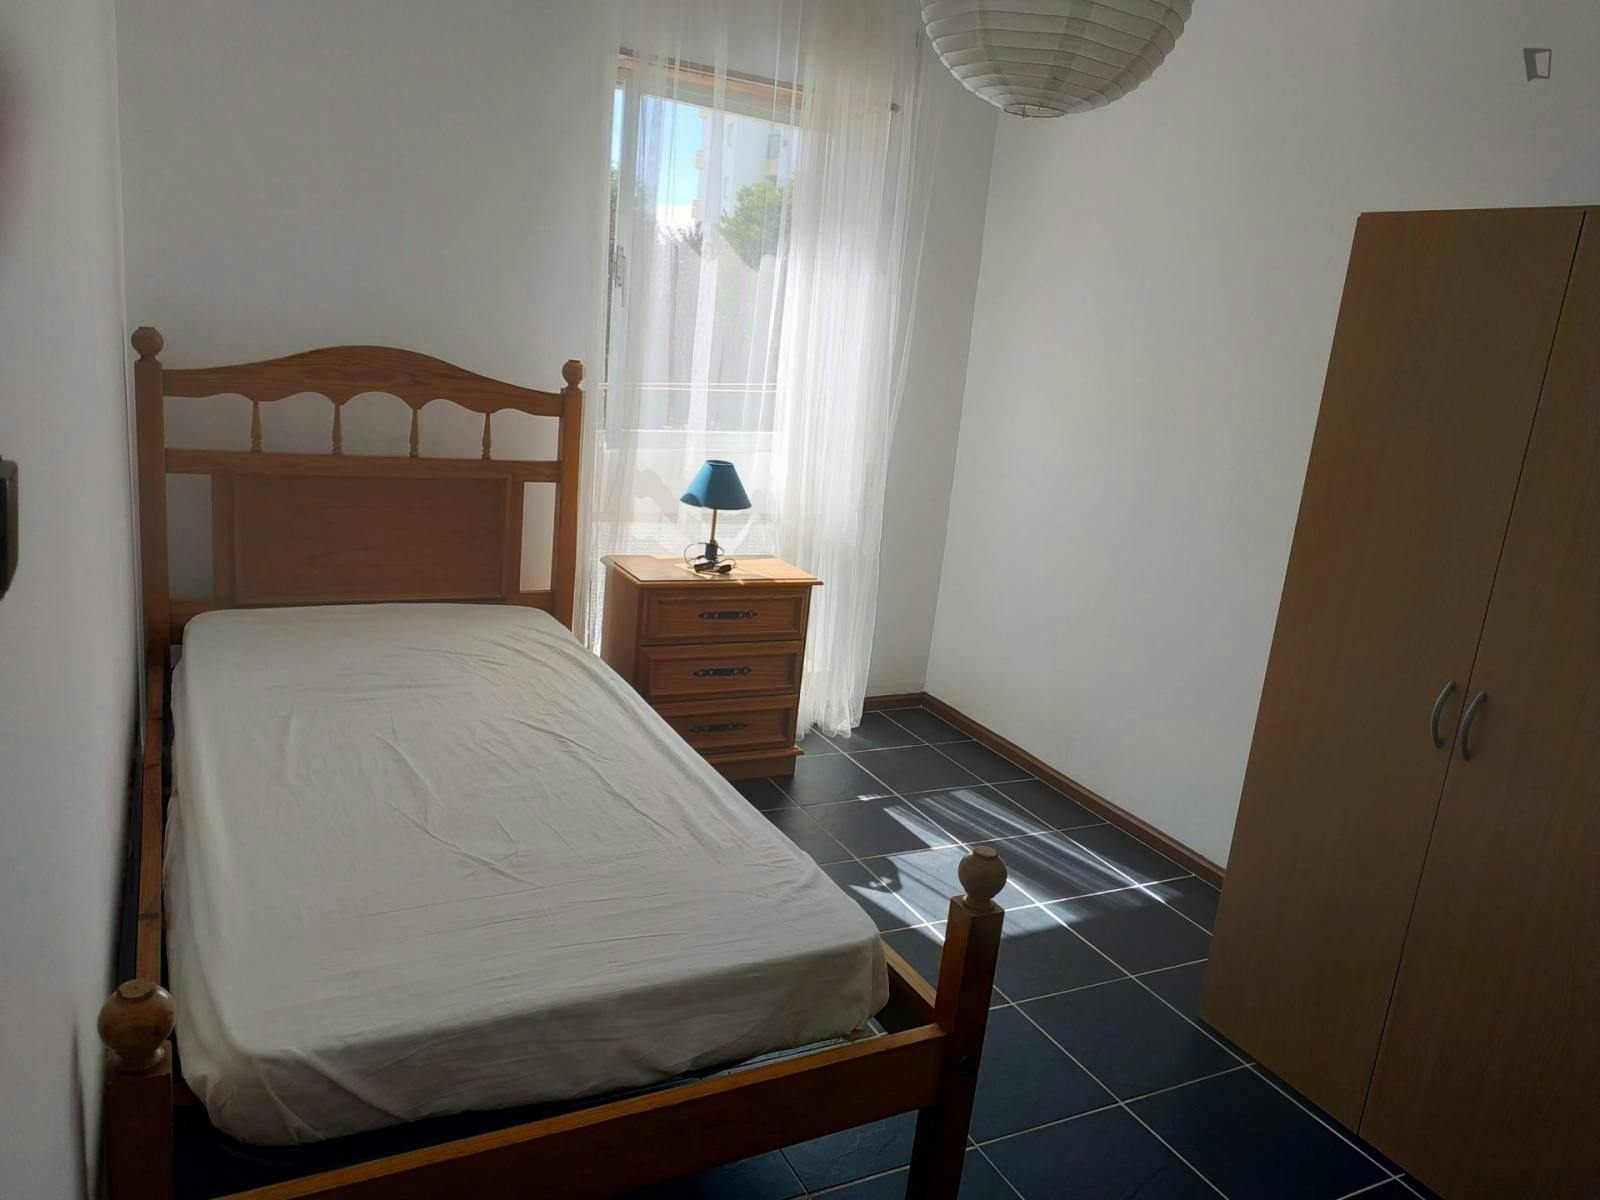 Single room in an apartment next to the hospital in Castelo Branco.